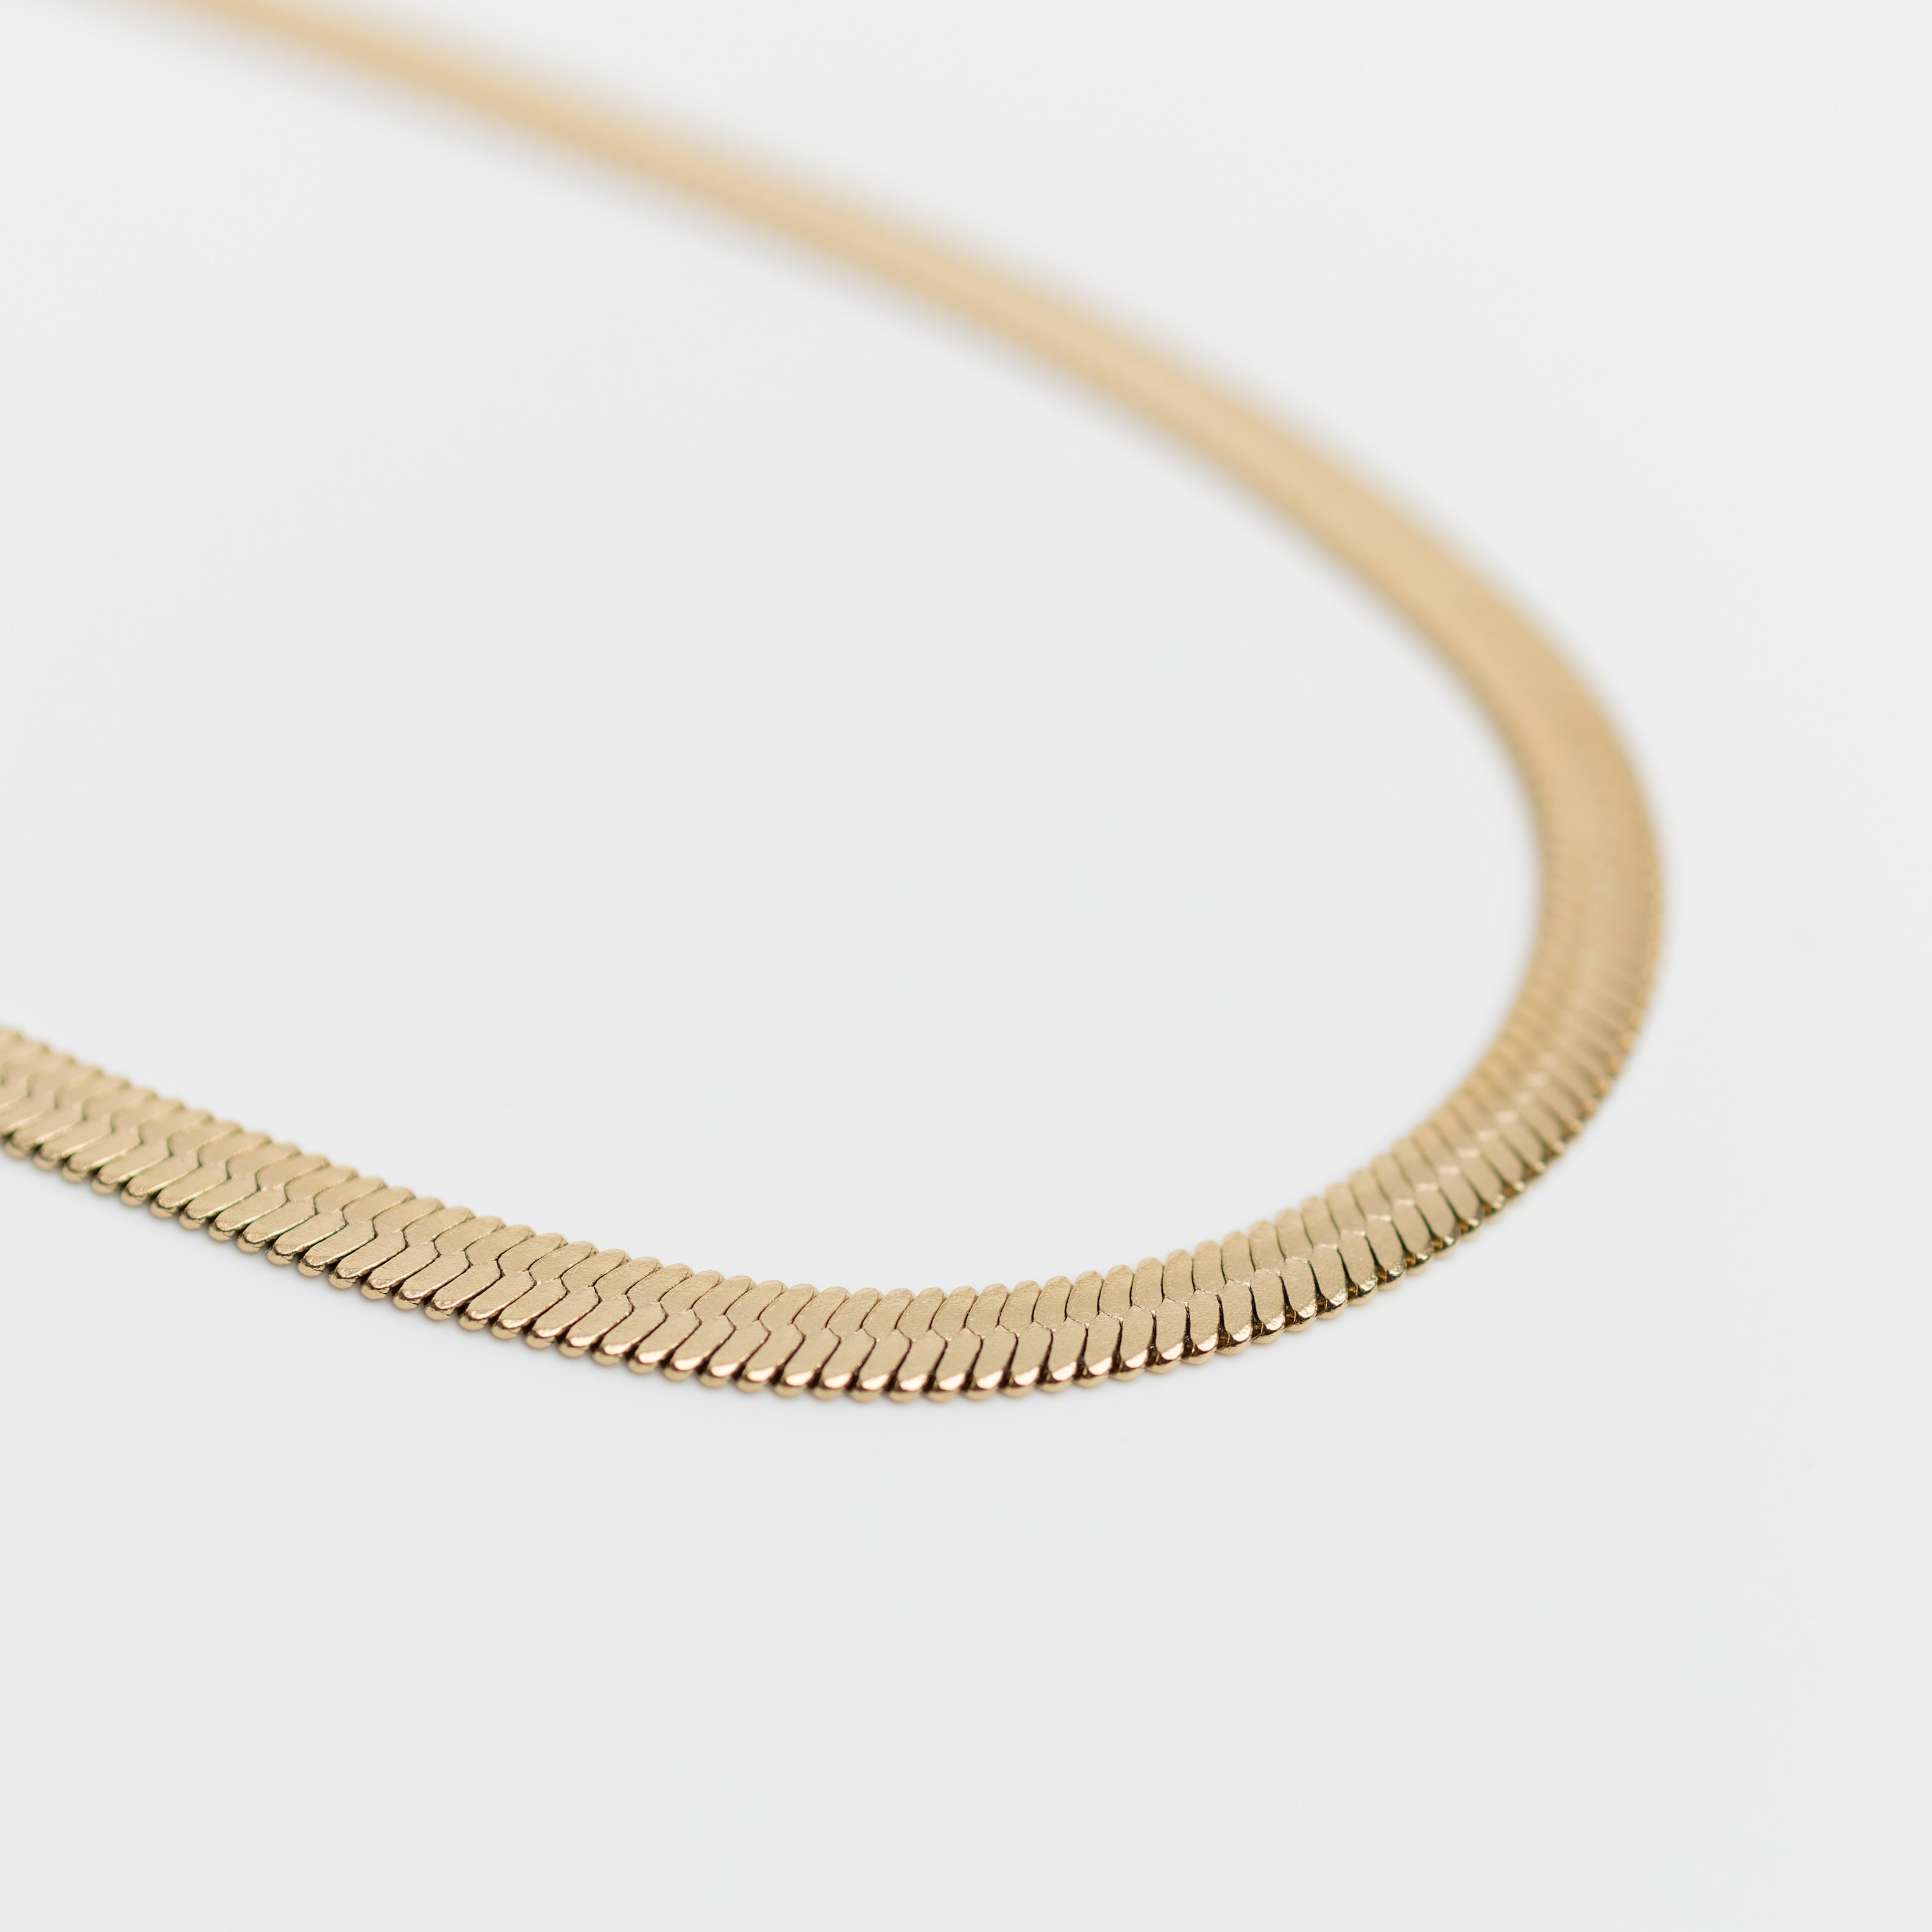 Nº2 - Stainless Steel 14K gold plated chain - Zafeer